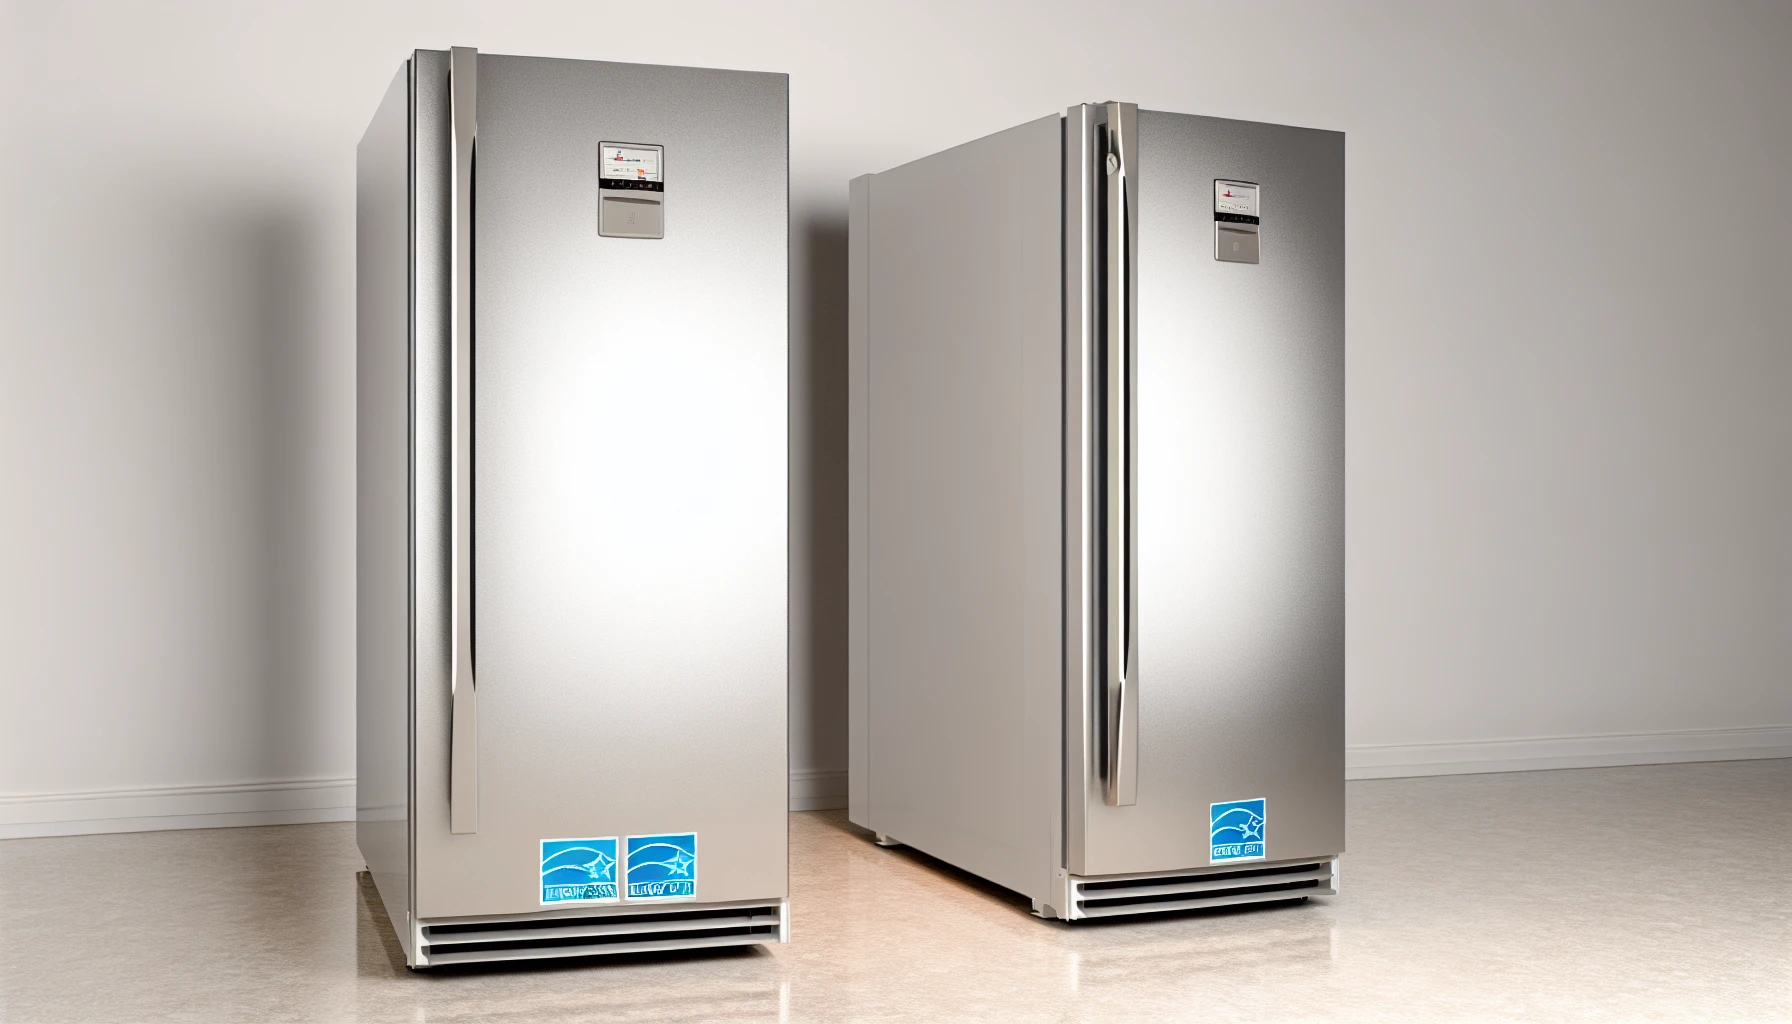 Comparison of energy-efficient refrigeration units with cost savings